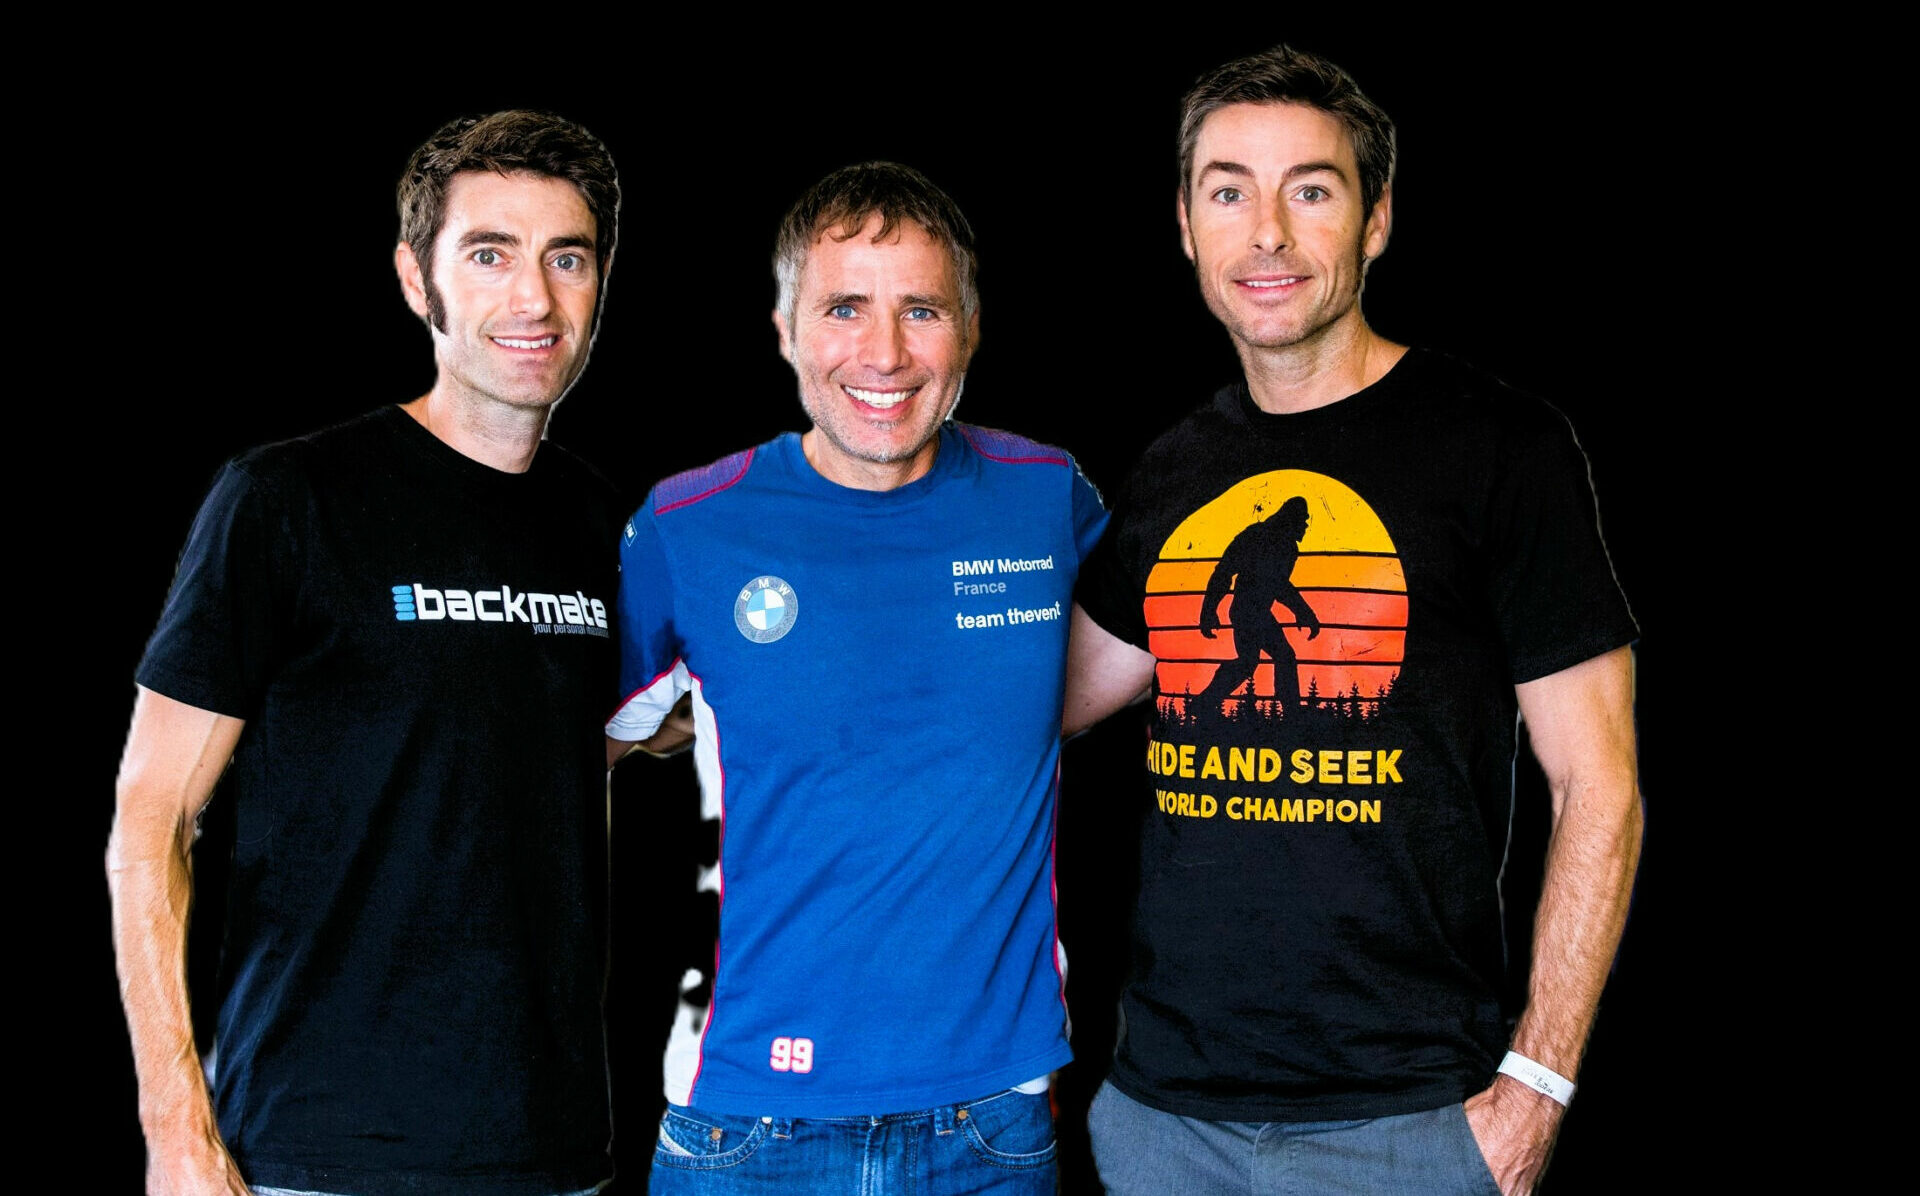 Fastrack Riders owner Imad Samhat (center) with Eric Bostrom (left) and Ben Bostrom (right). Photo courtesy Fastrack Riders.